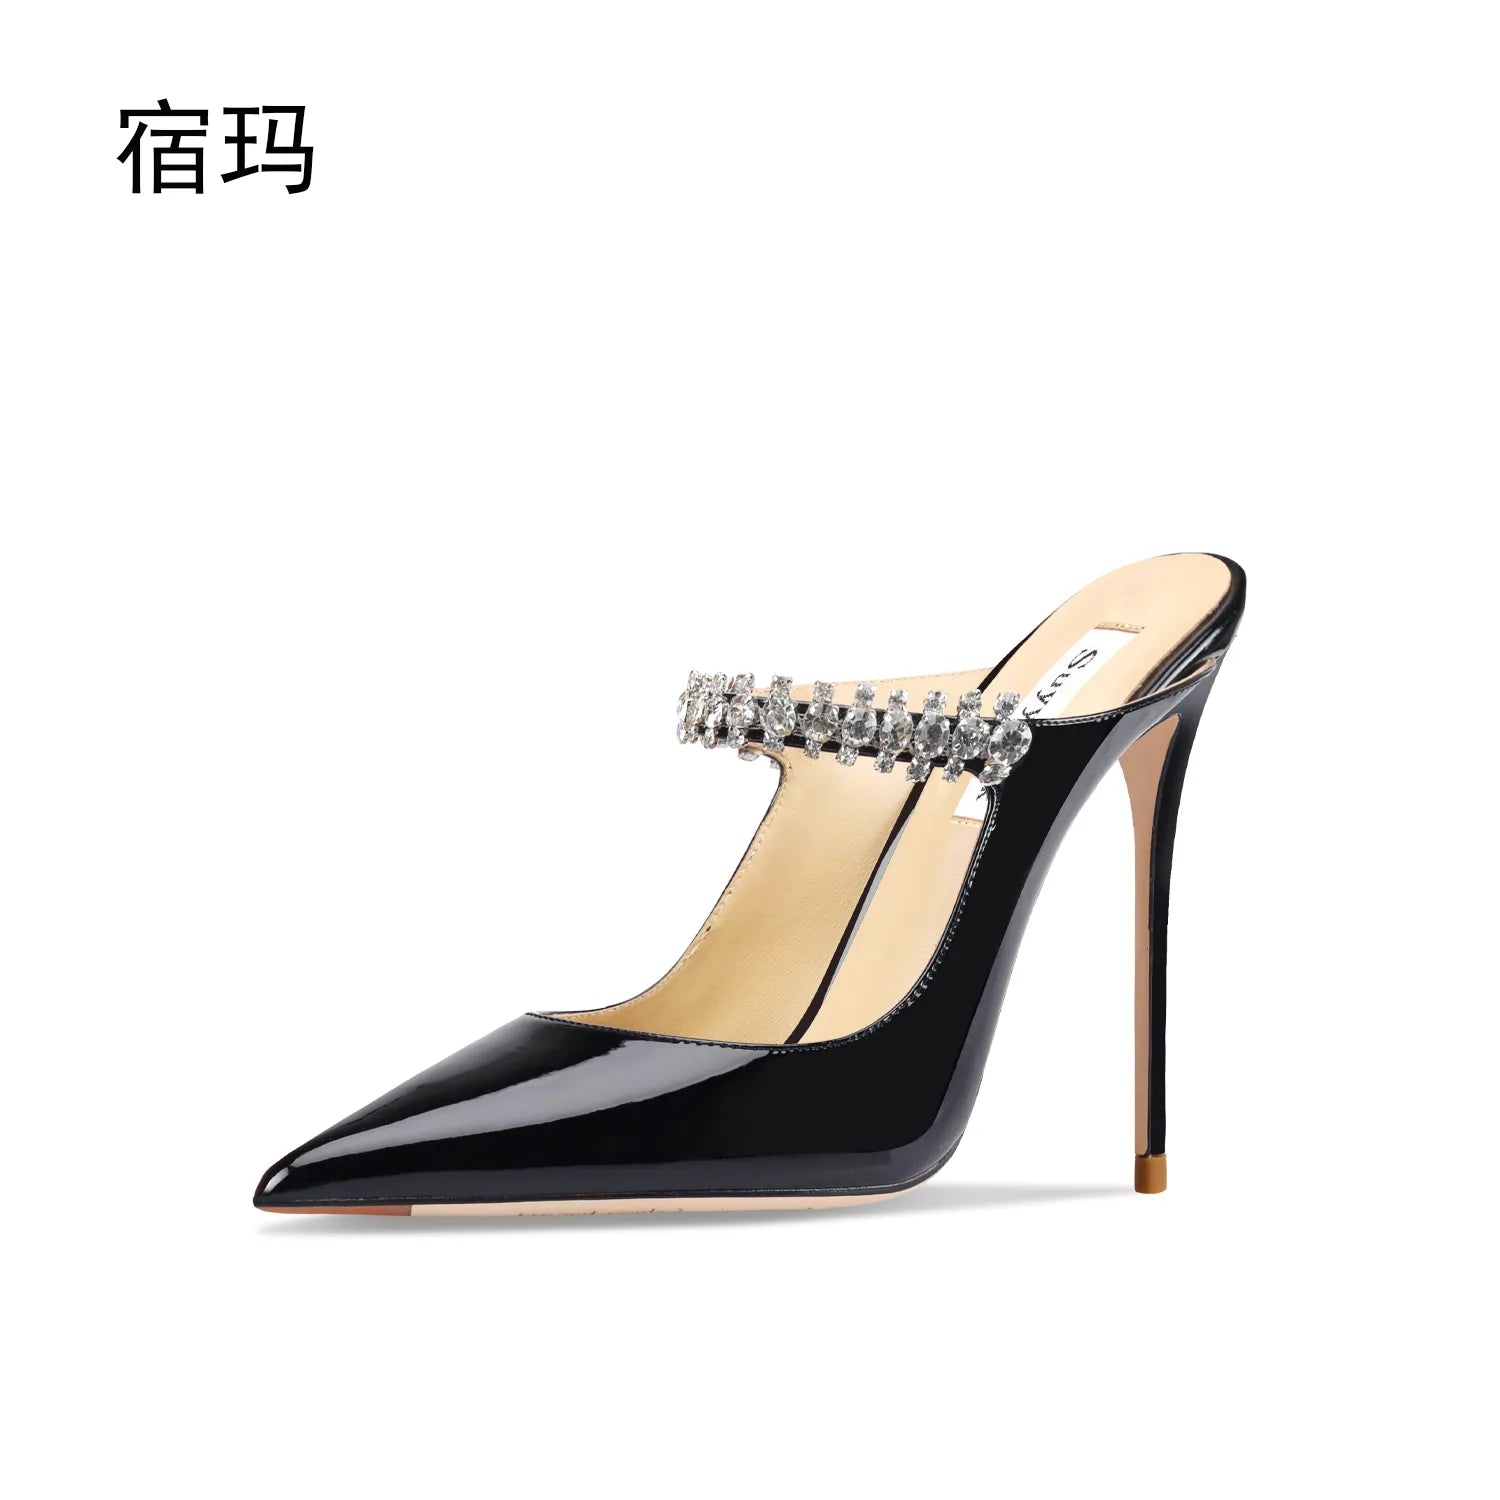 2023 Summer Women Sandals High Heel Slippers Crystal Decoration Pointed Toe Back Strap Elastic Band Elegant Fashion Shoes Ladies